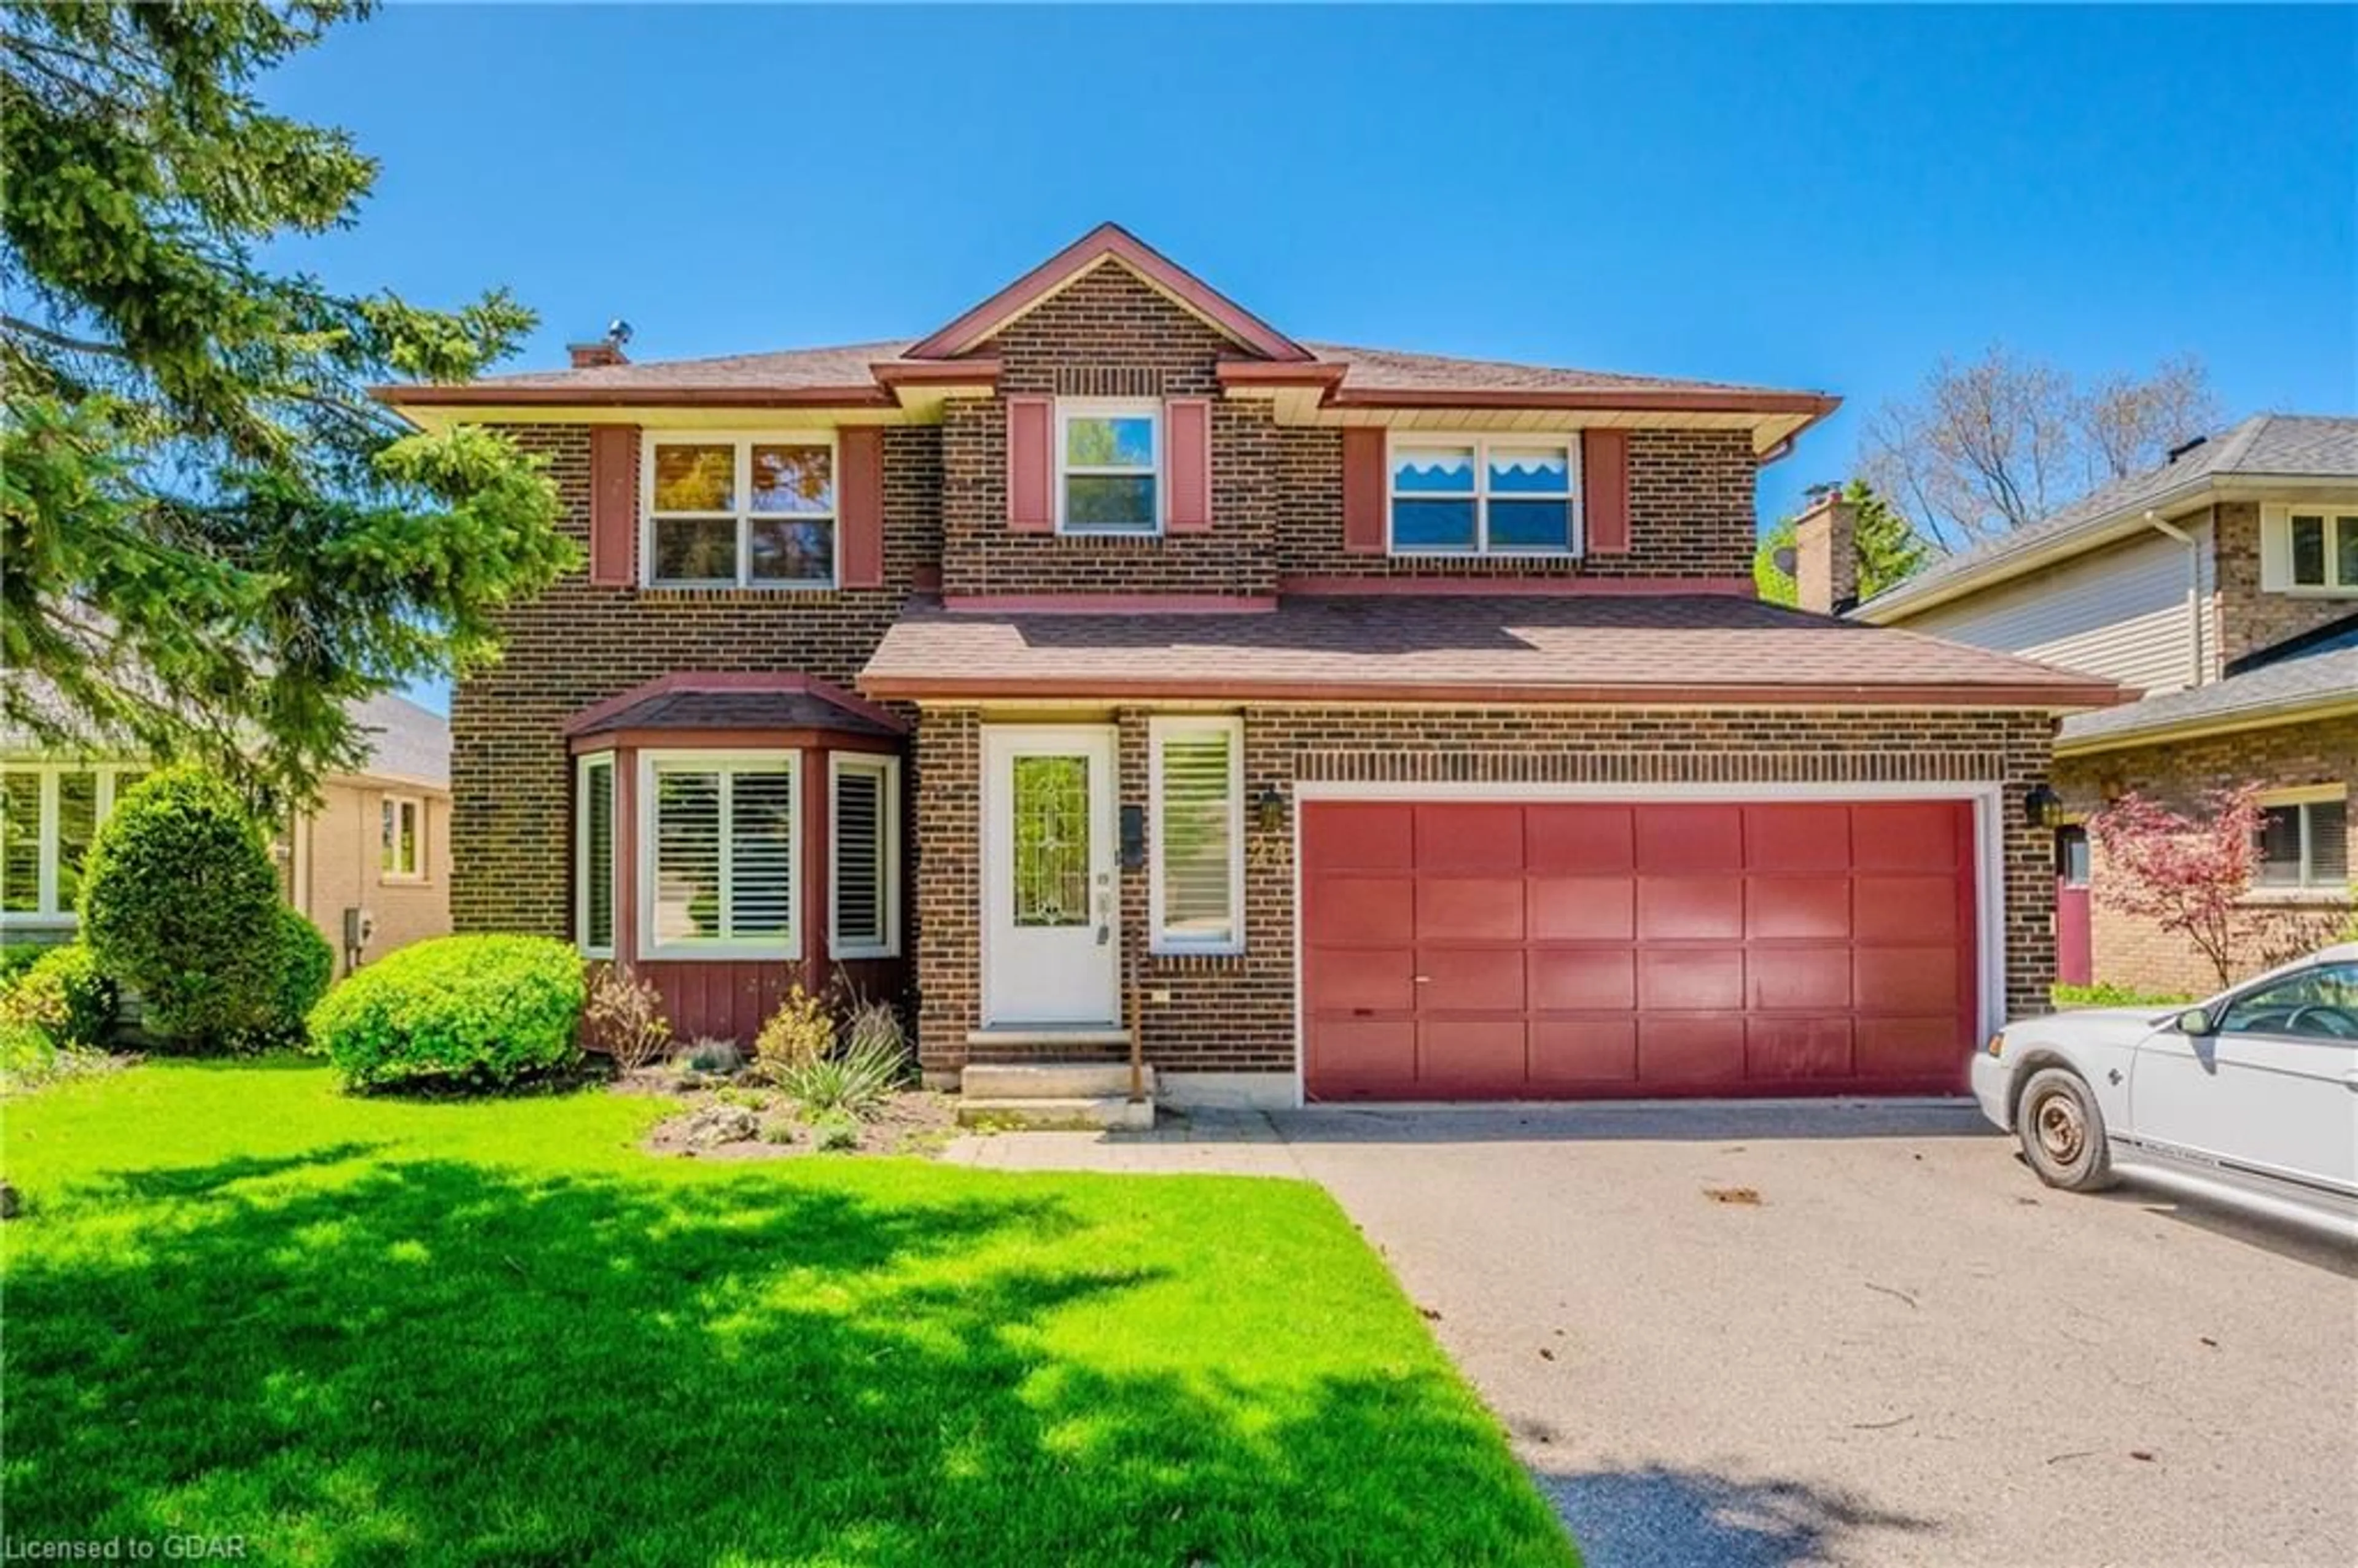 Home with brick exterior material for 24 Bridlewood Dr, Guelph Ontario N1G 4B1